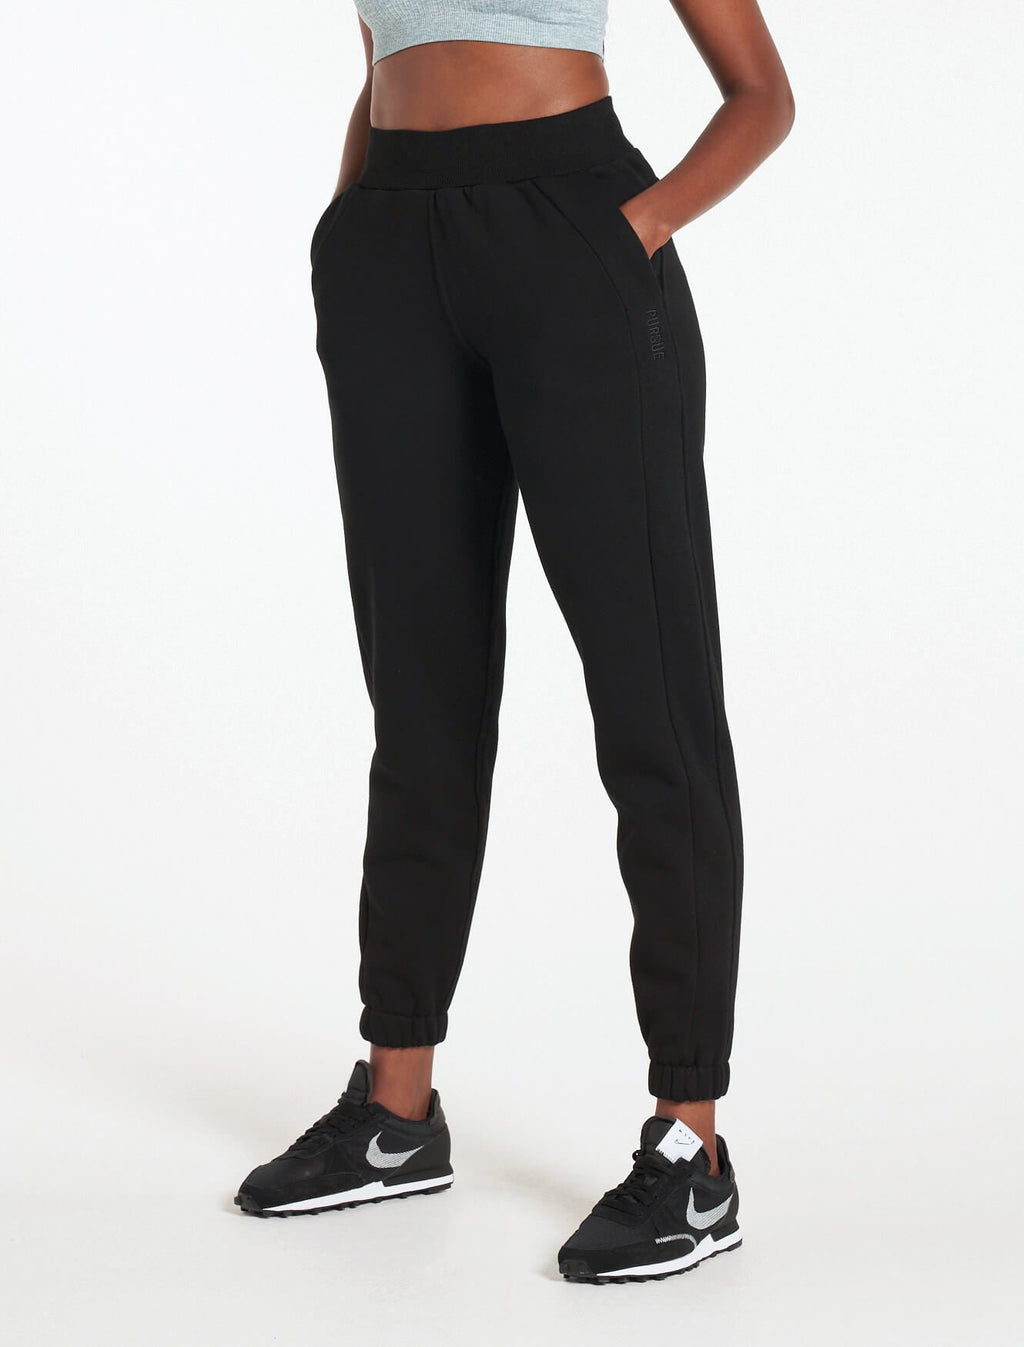 products/womens-select-bottoms-blackout.jpg